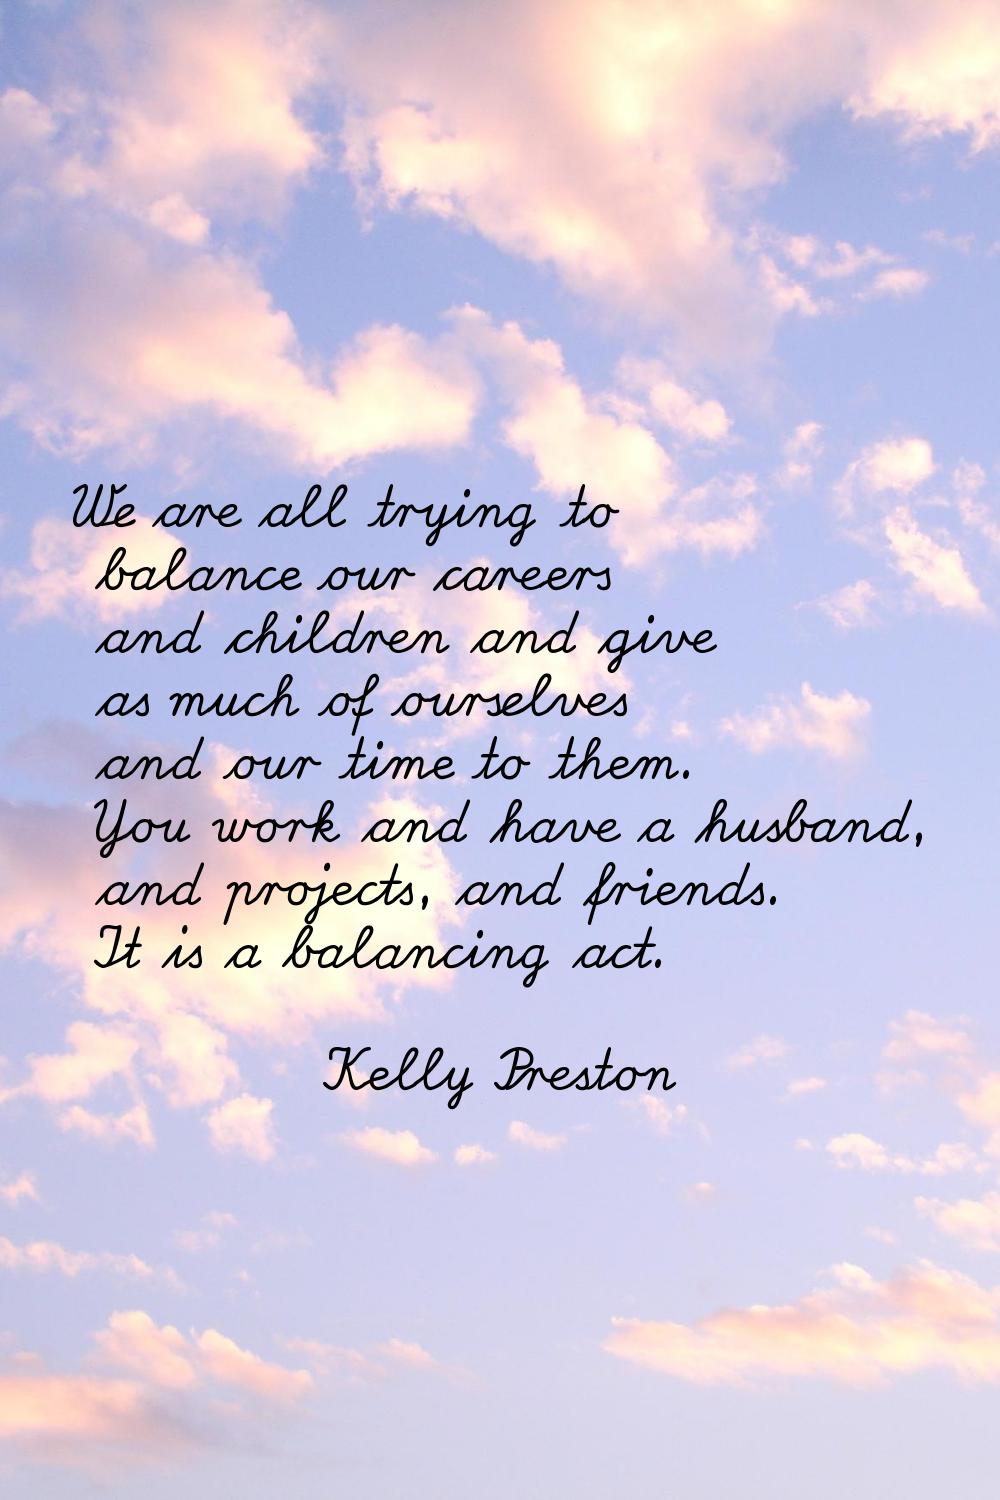 We are all trying to balance our careers and children and give as much of ourselves and our time to